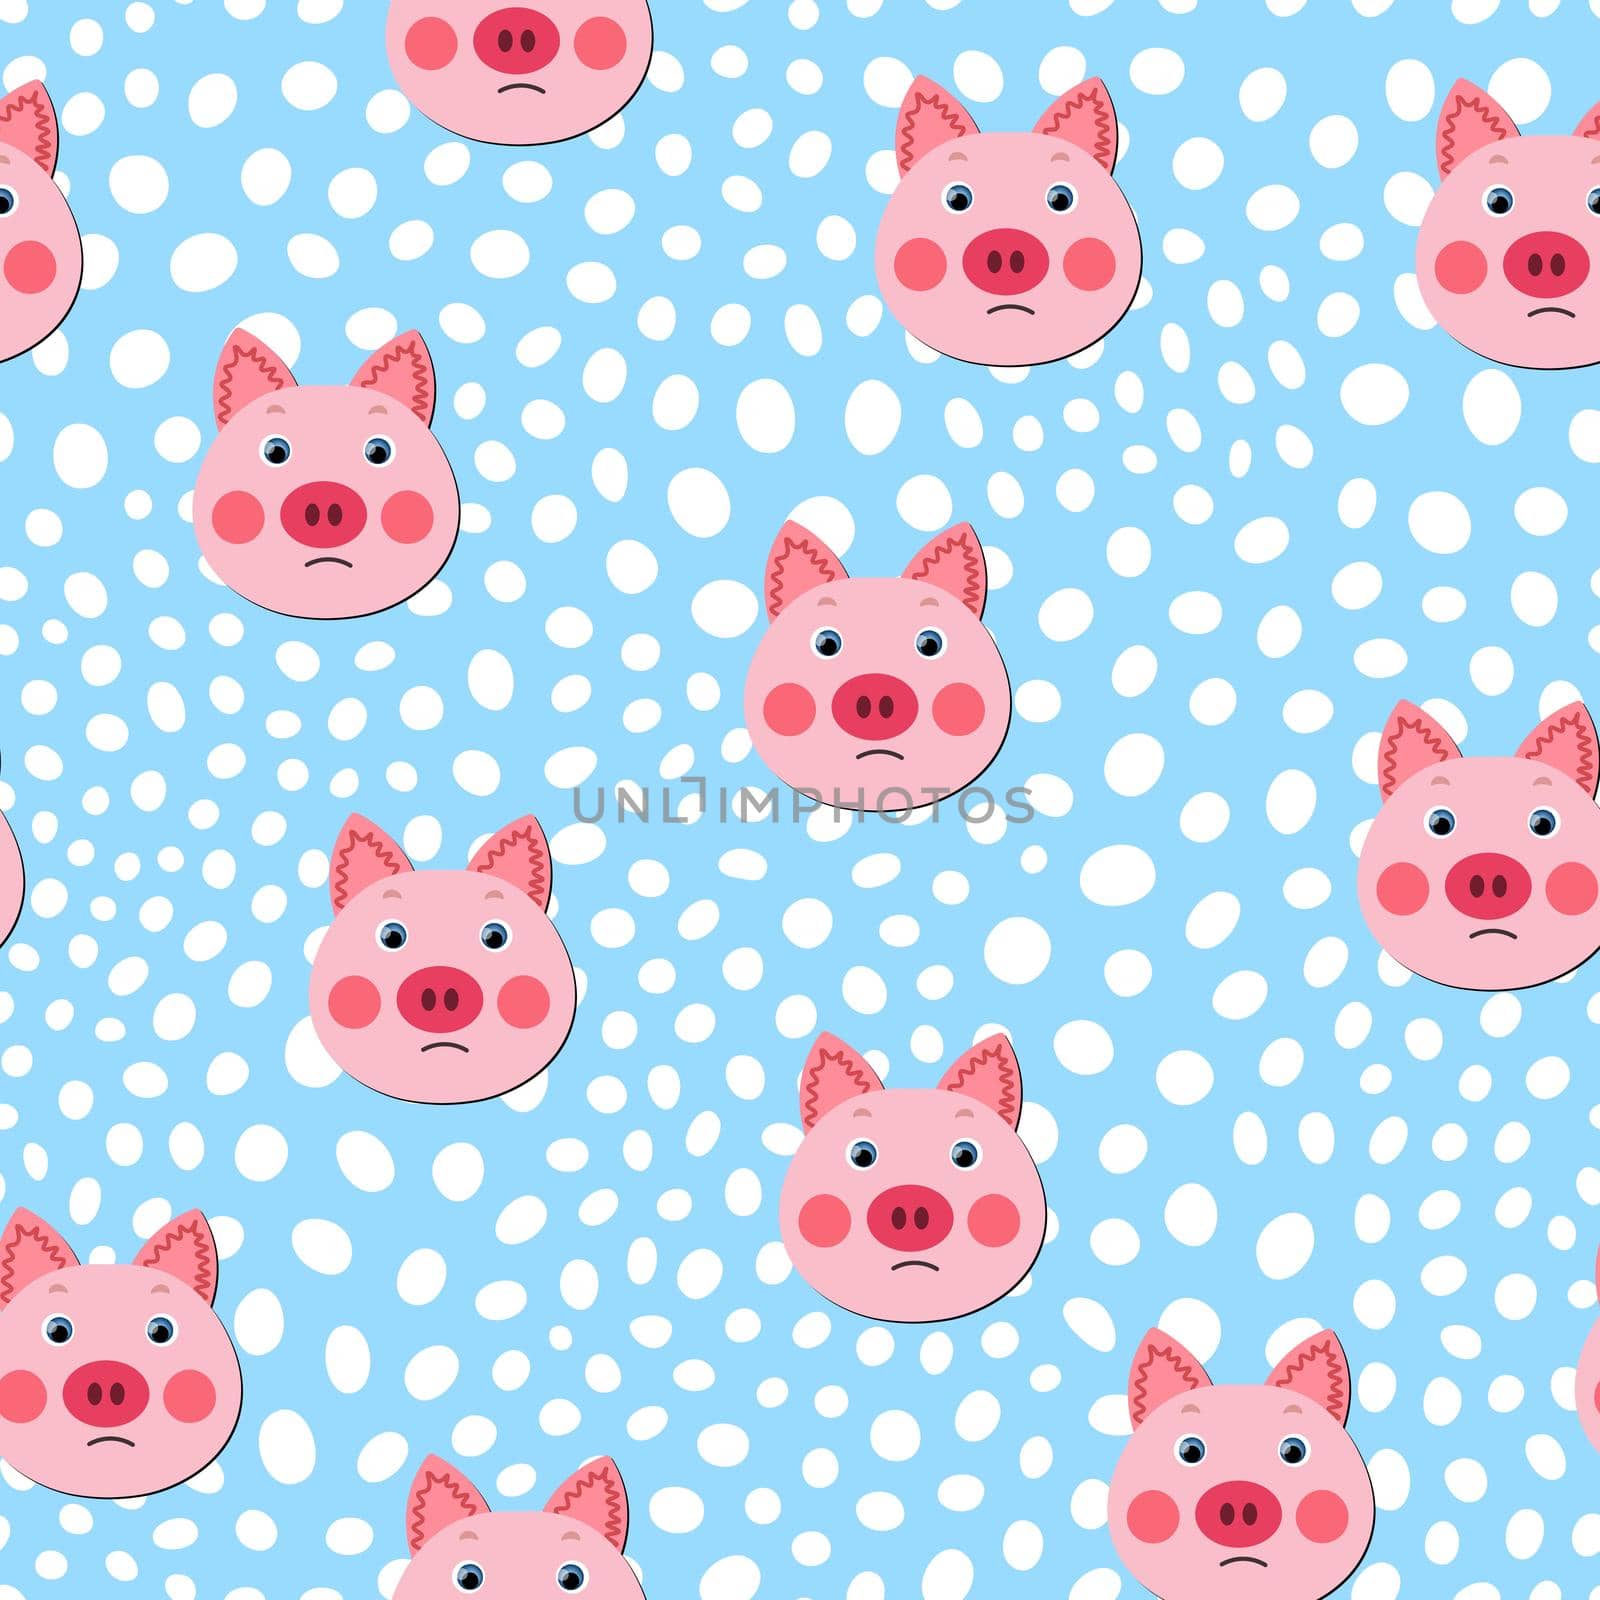 Vector flat animals colorful illustration for kids. Seamless pattern with cute pig face on color polka dots background. Adorable cartoon character. Design for textures, card, poster, fabric, textile. by allaku